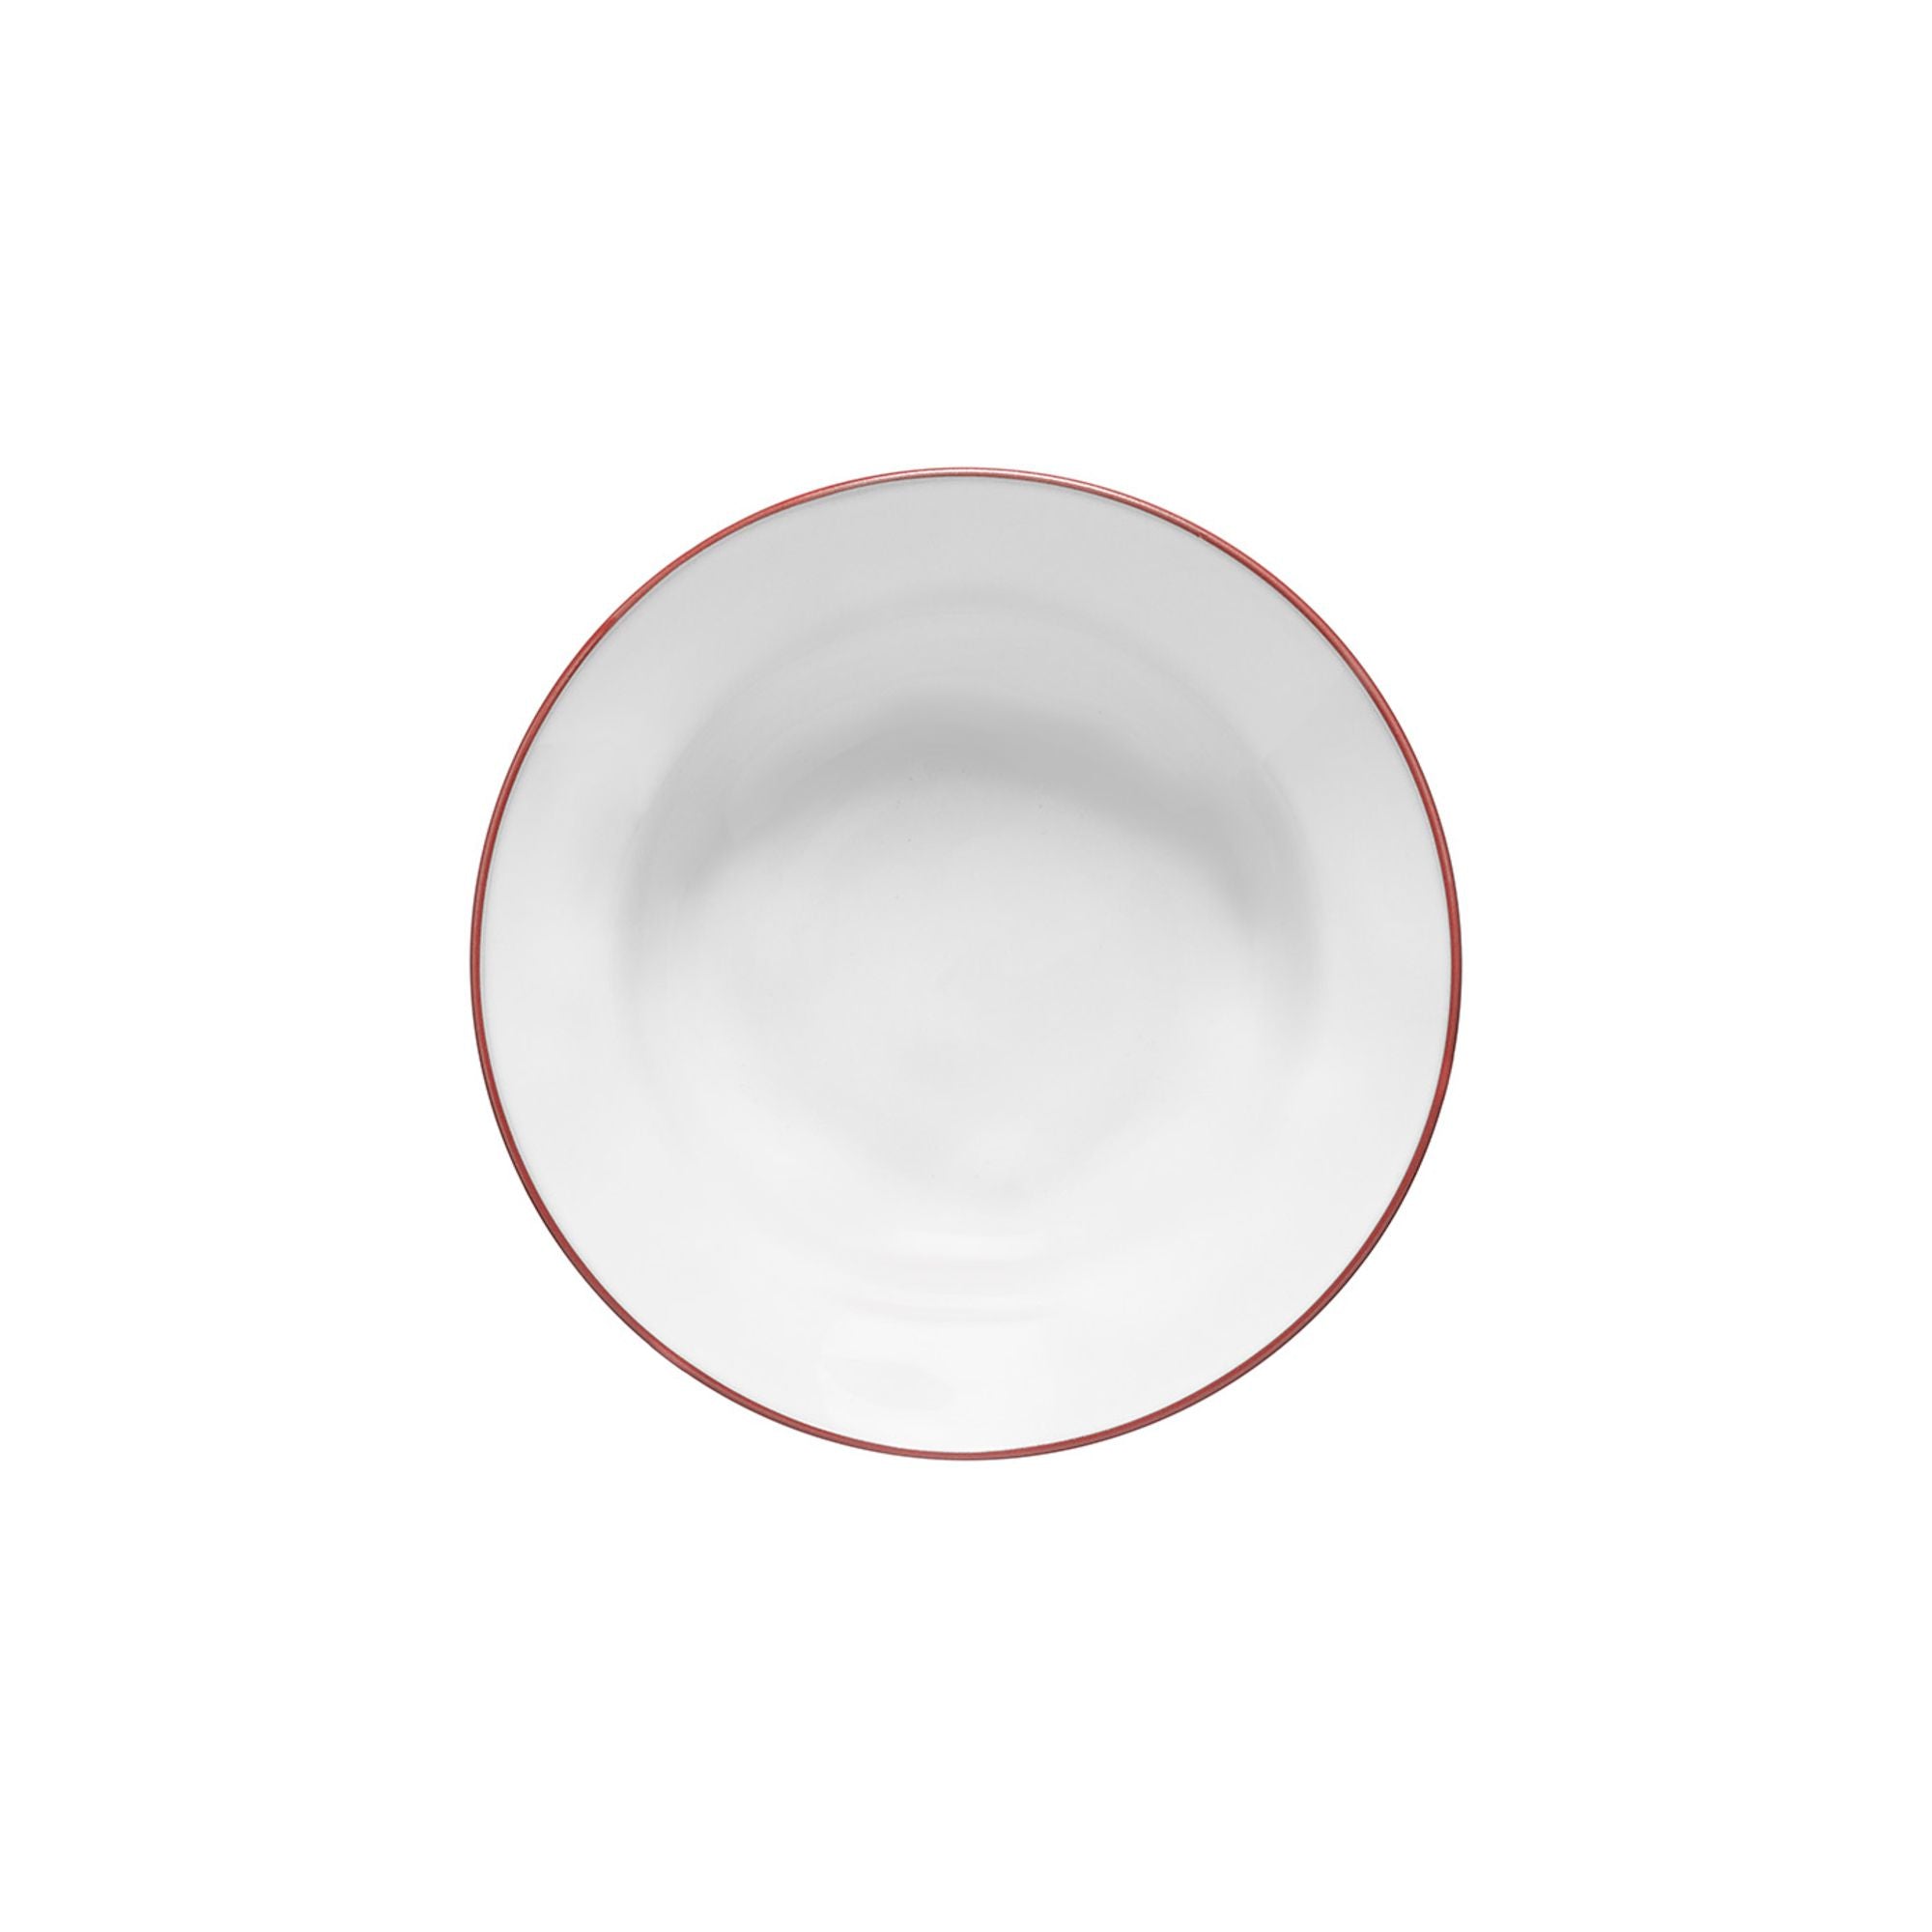 Beja Soup/Pasta Plate 8" White-Red